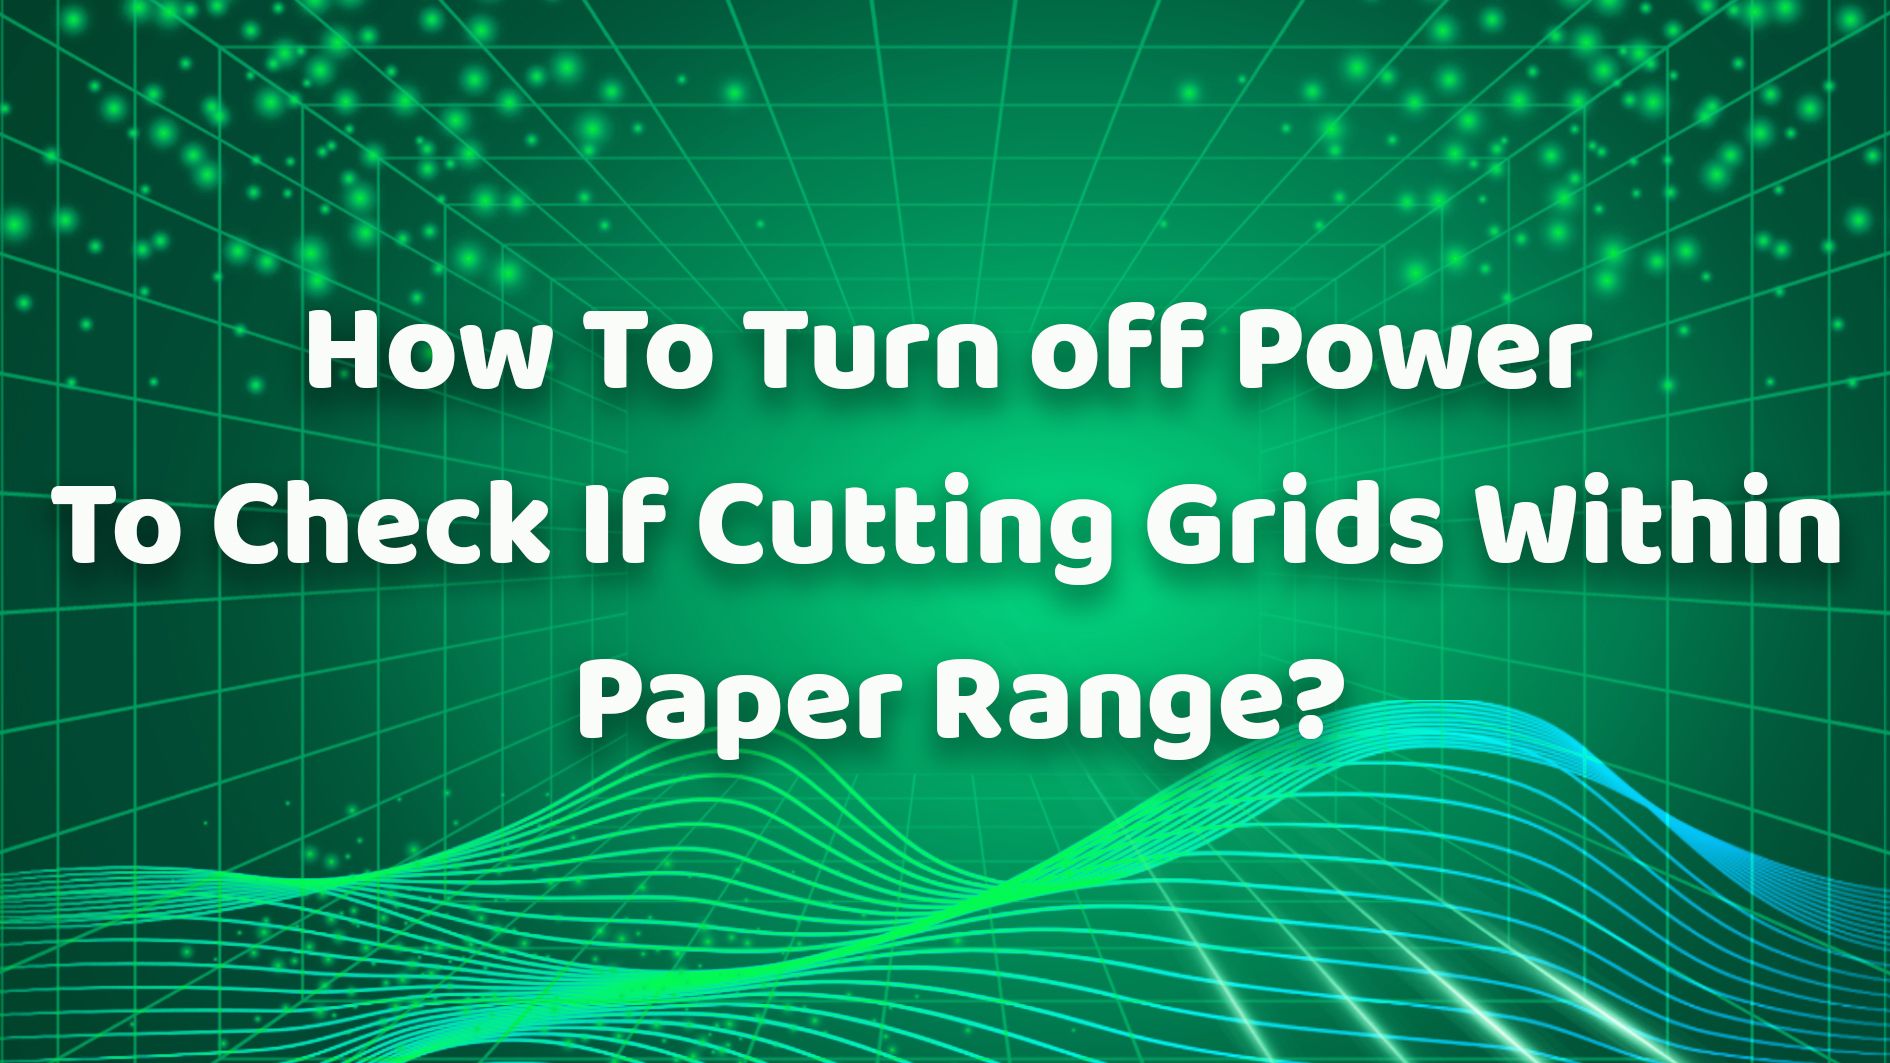 How To Turn off Power To Check If Cutting Grids Within Paper Range？